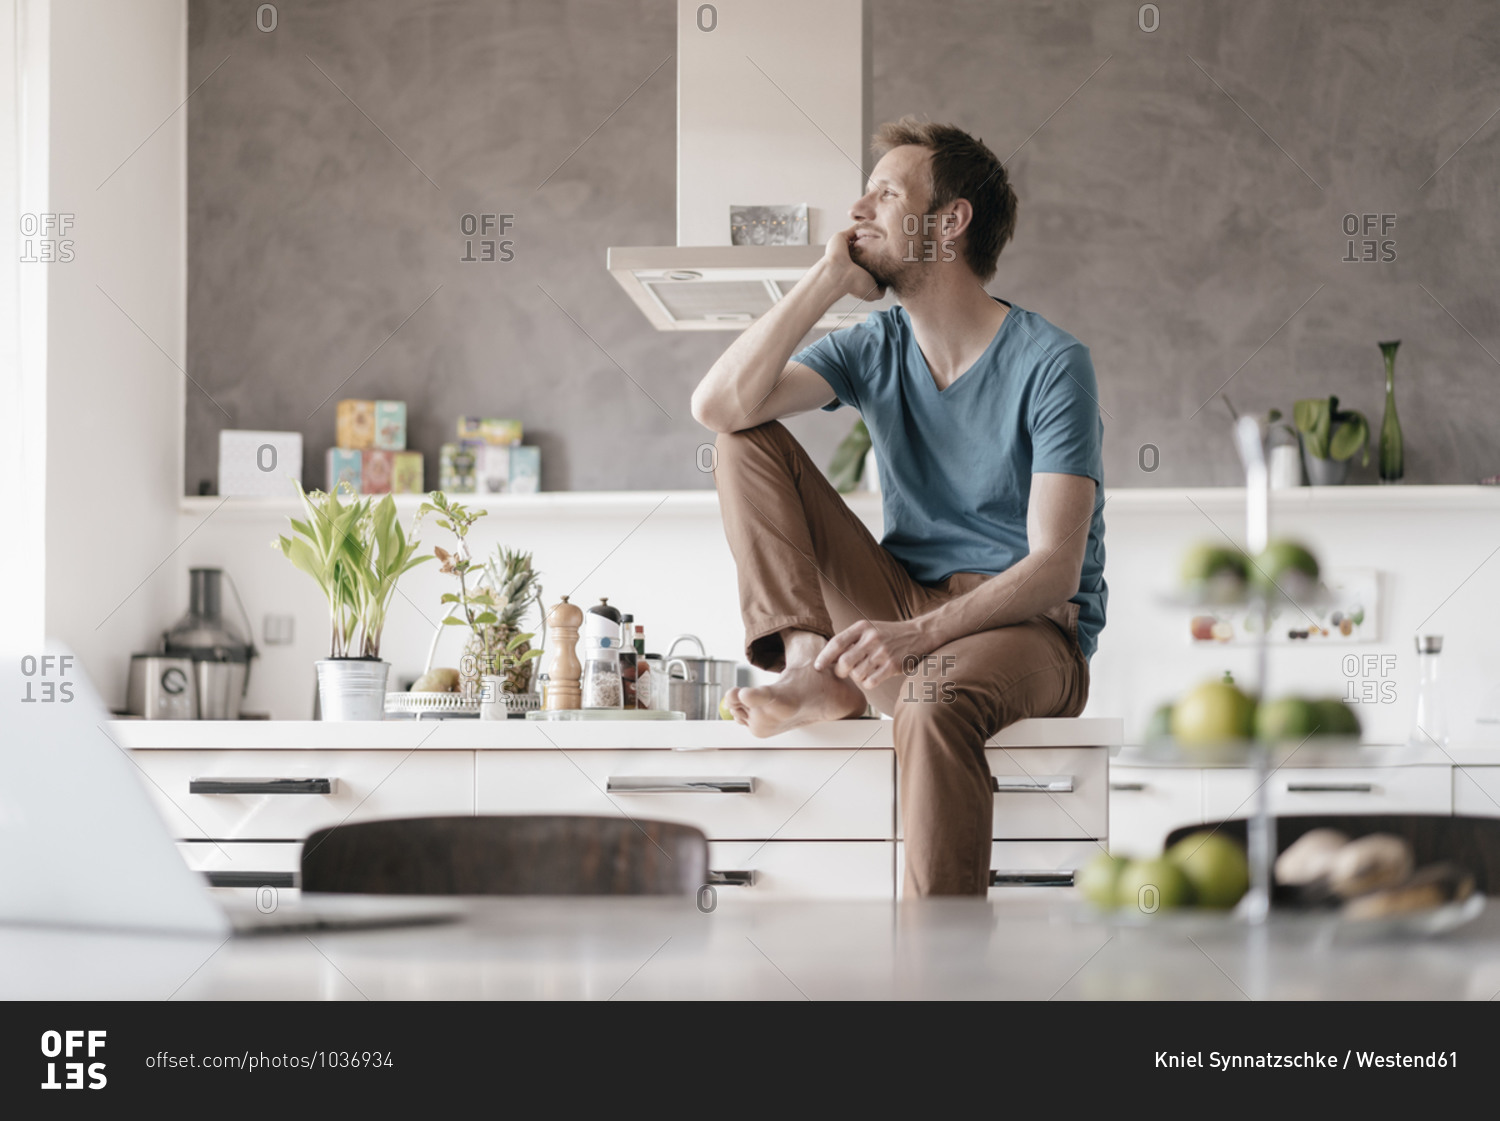 Smiling man sitting on kitchen counter looking at distance